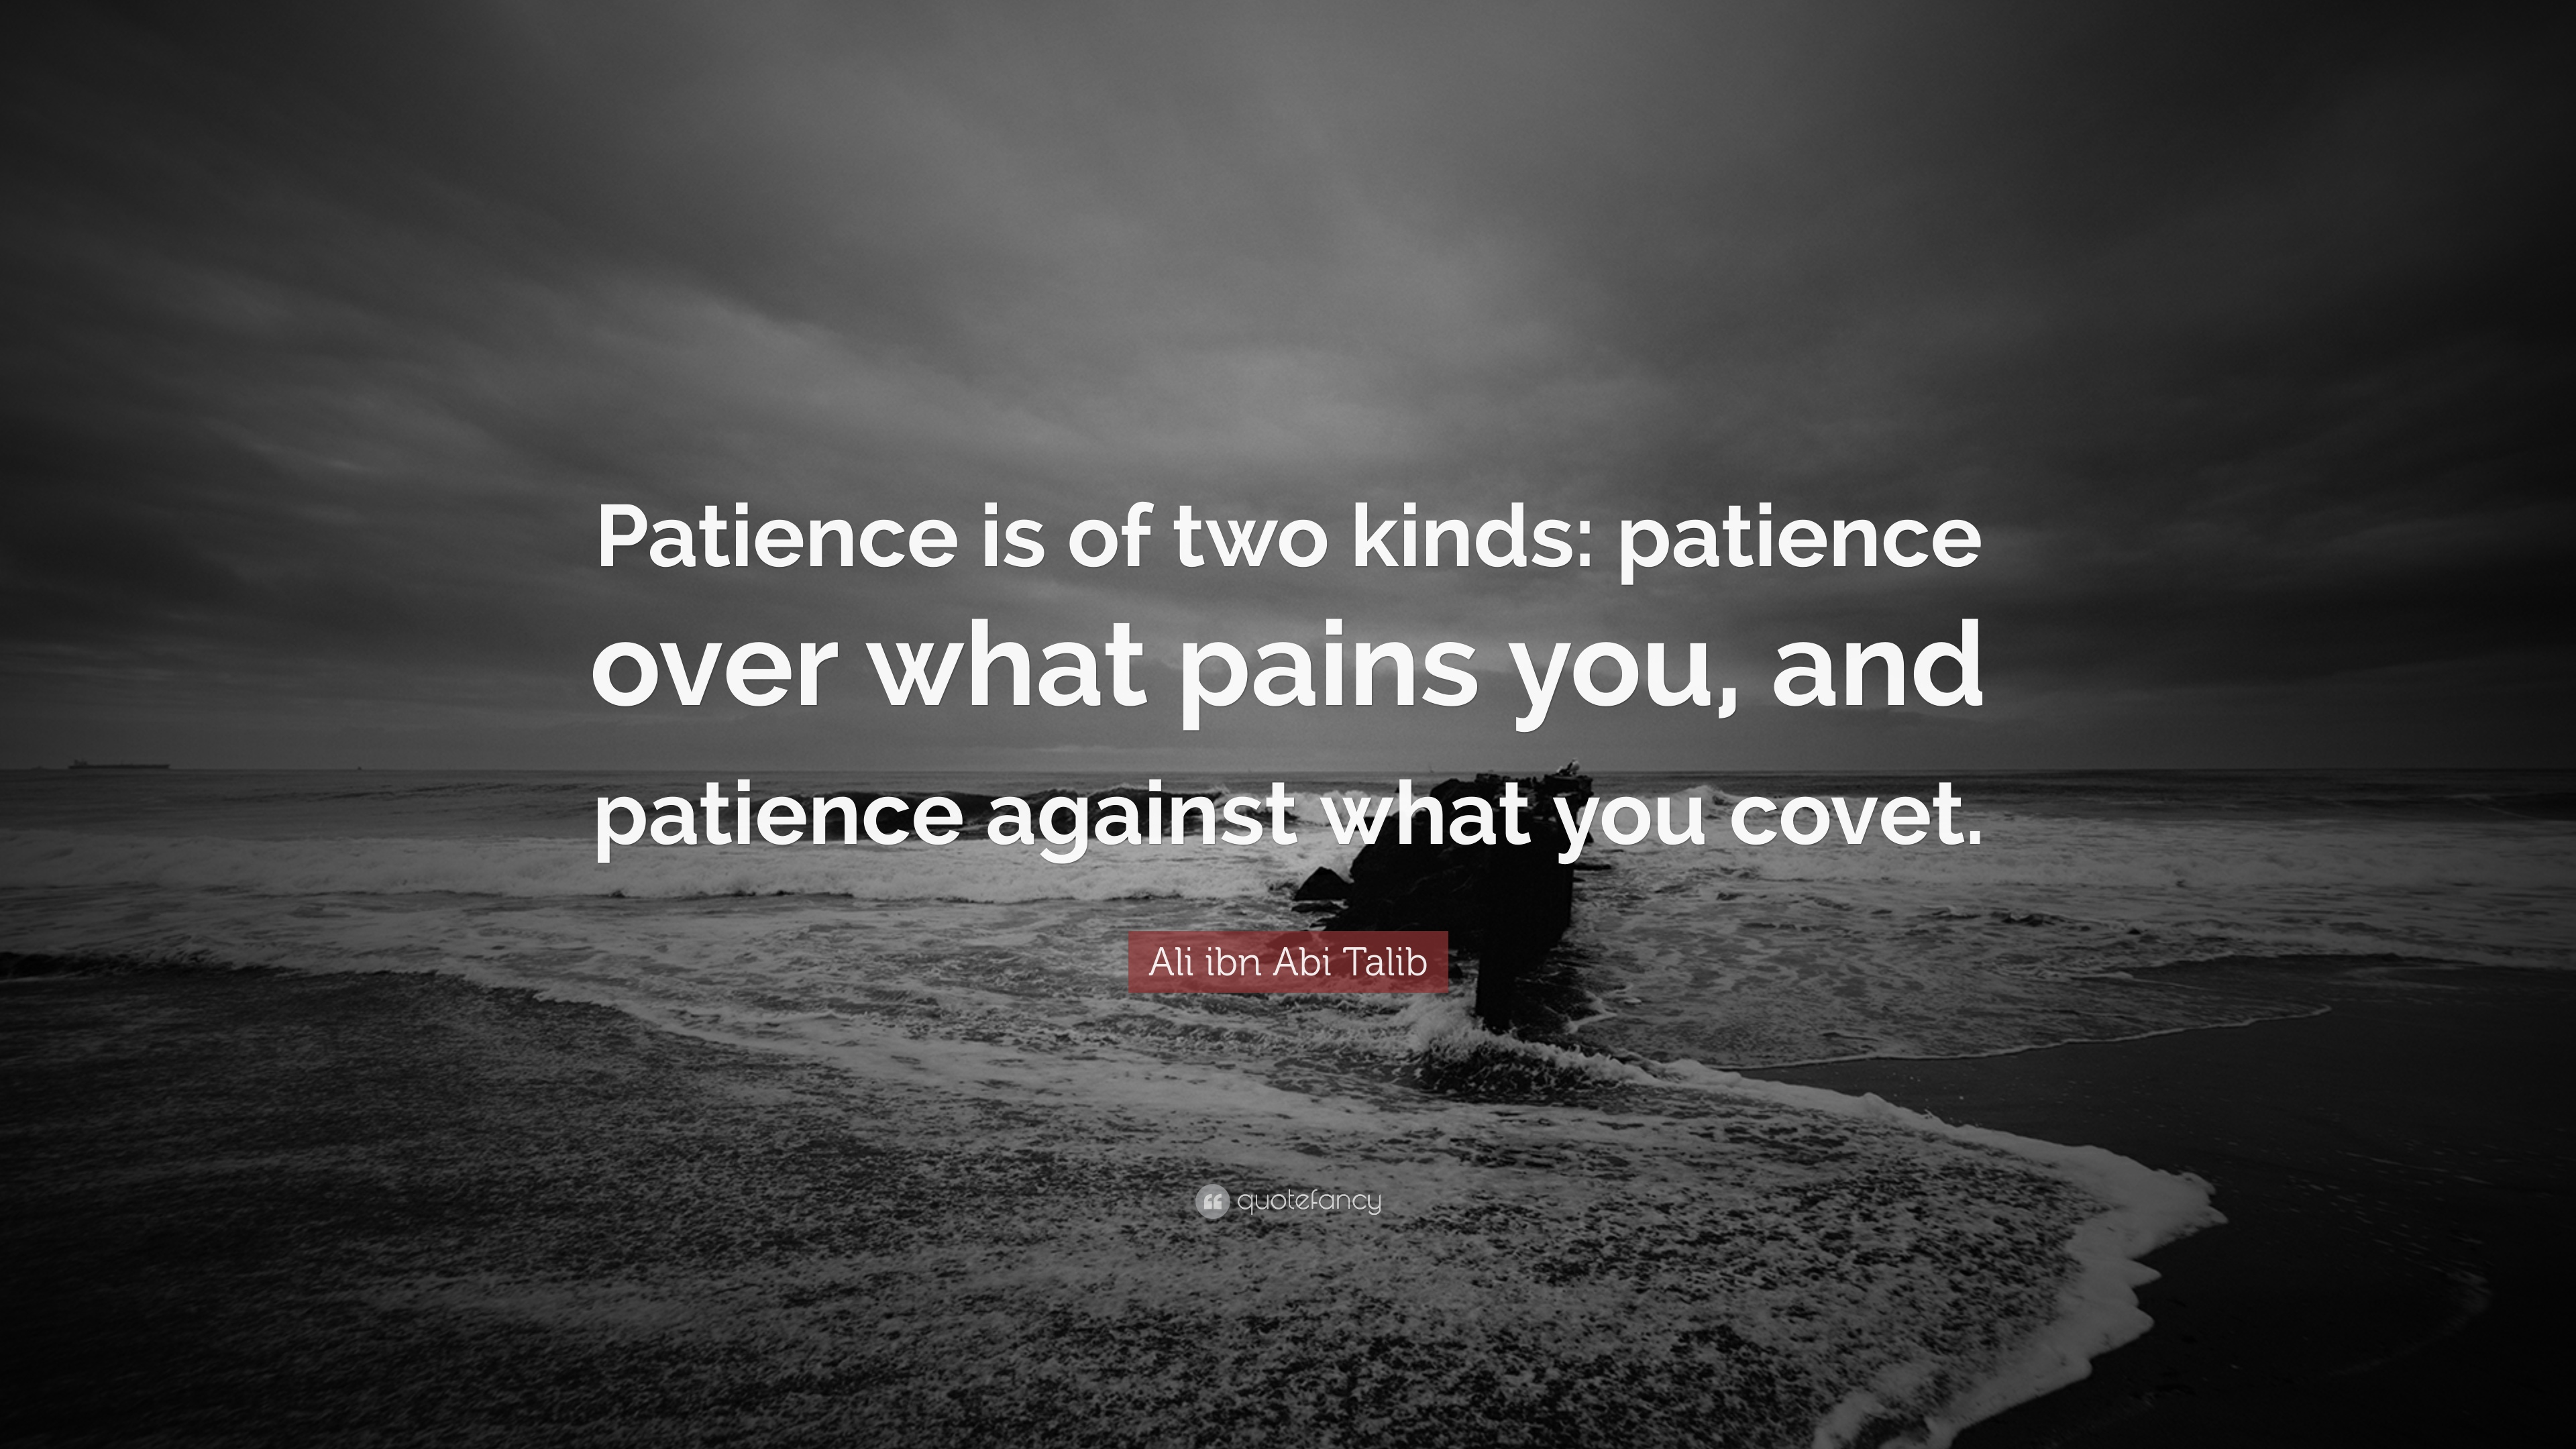 Ali ibn Abi Talib Quote: “Patience is of two kinds: patience over what pains you, and